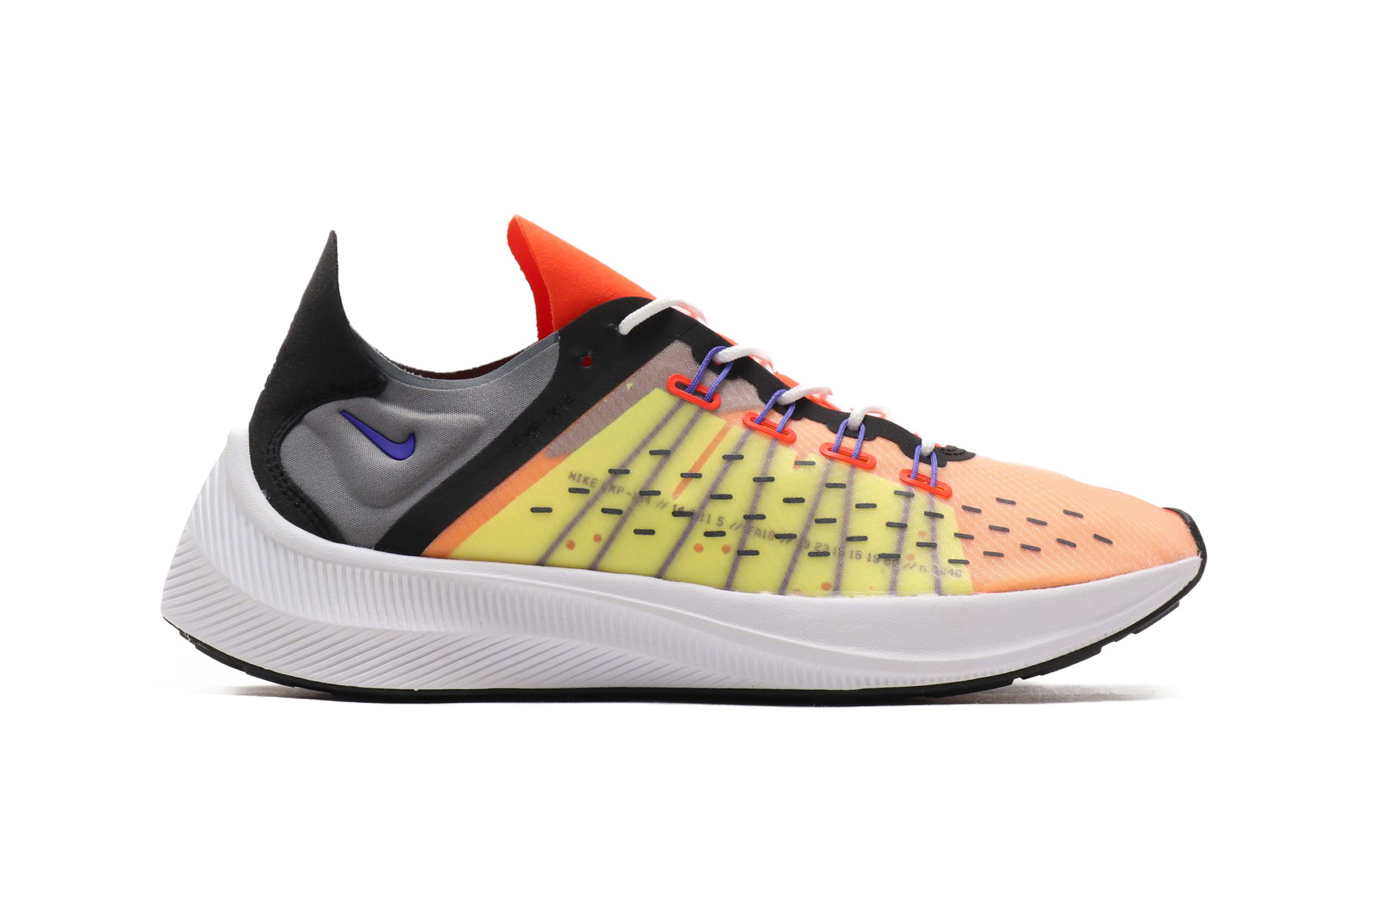 NIKE EXP-X14 Team Orange Persian Violet volt black AO1554-800 green purple grey yellow release date information purchase atmos sneakers shoes